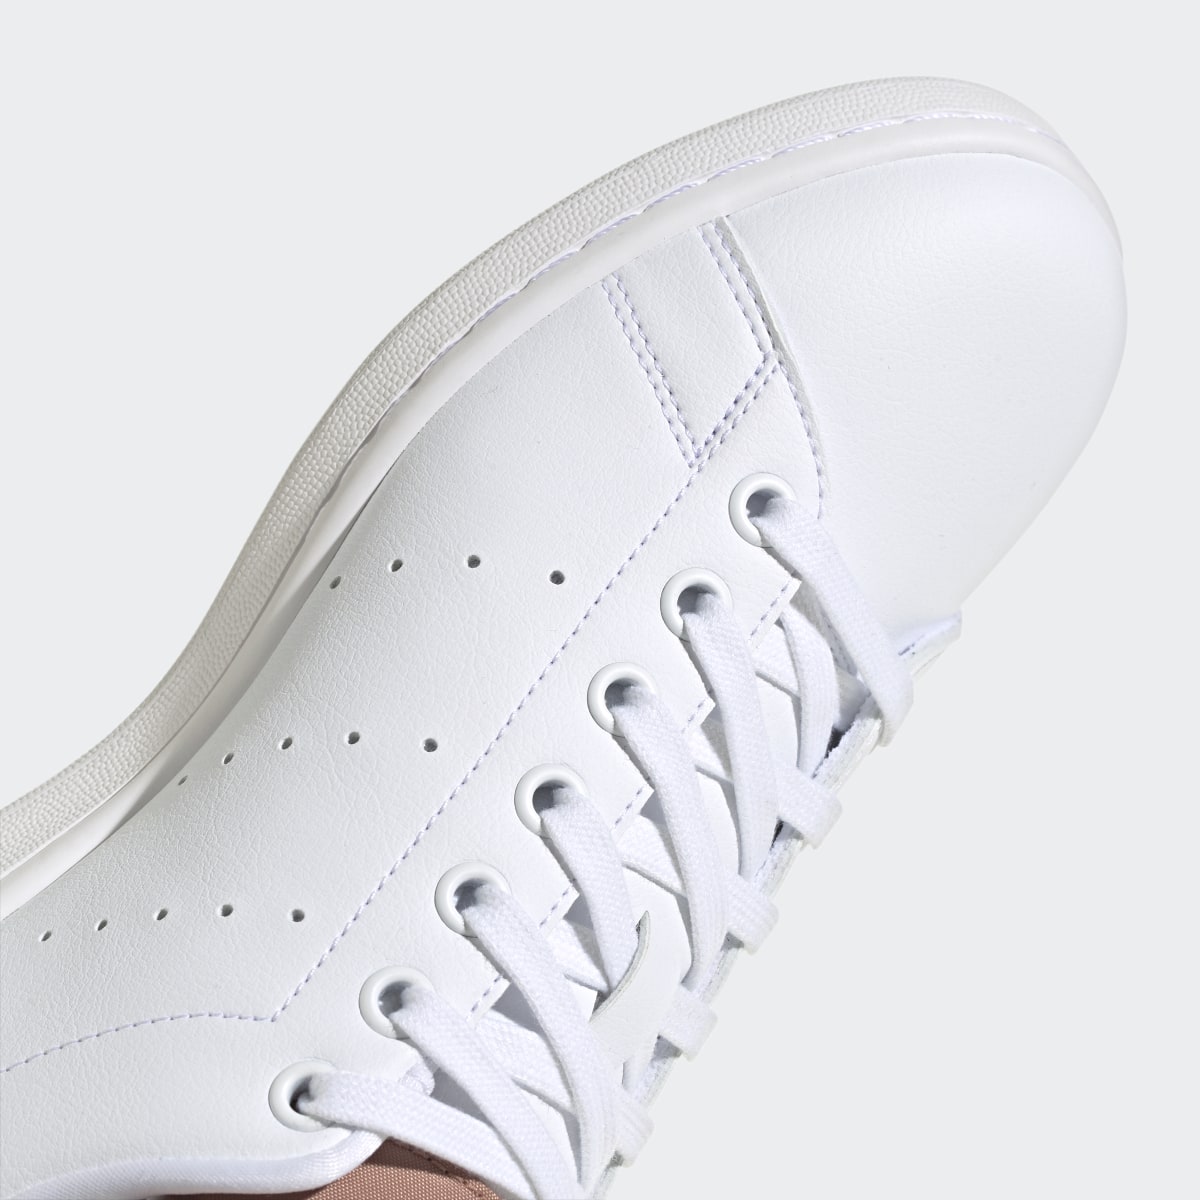 Adidas Stan Smith Shoes. 10